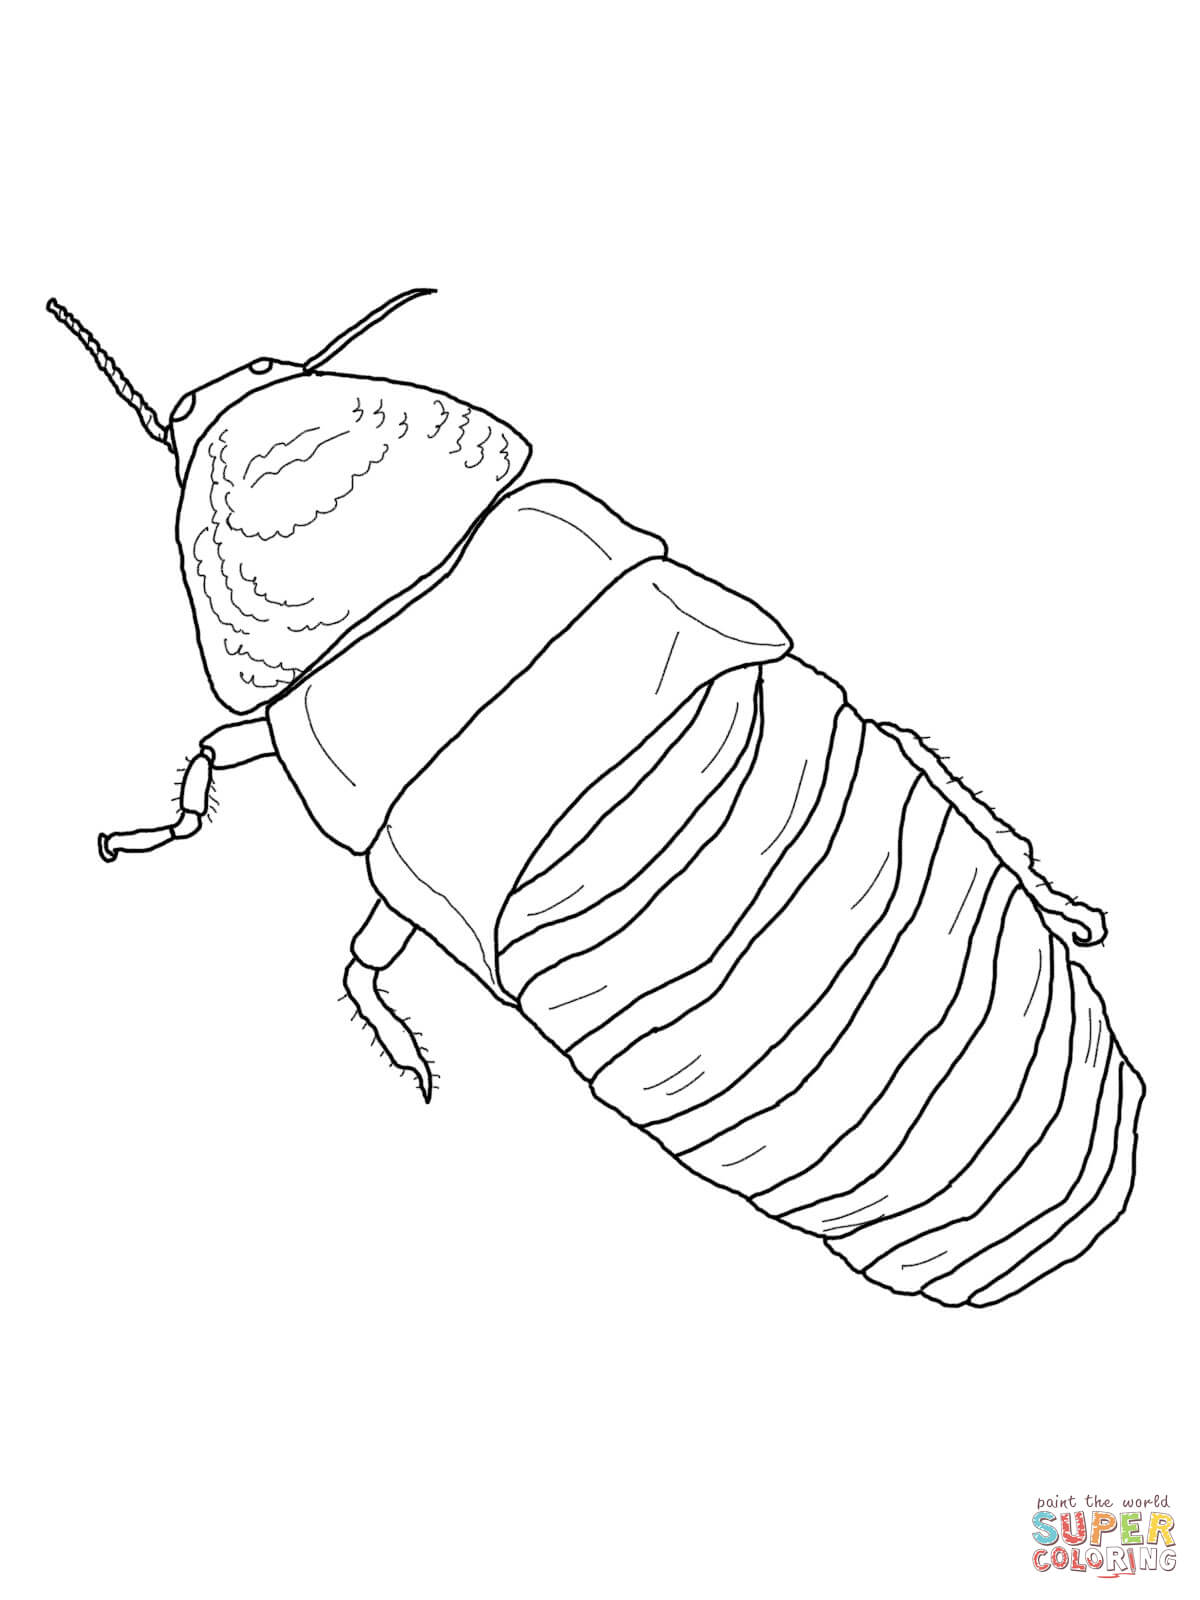 Madagascar Hissing Cockroach coloring page | Free Printable Coloring Pages